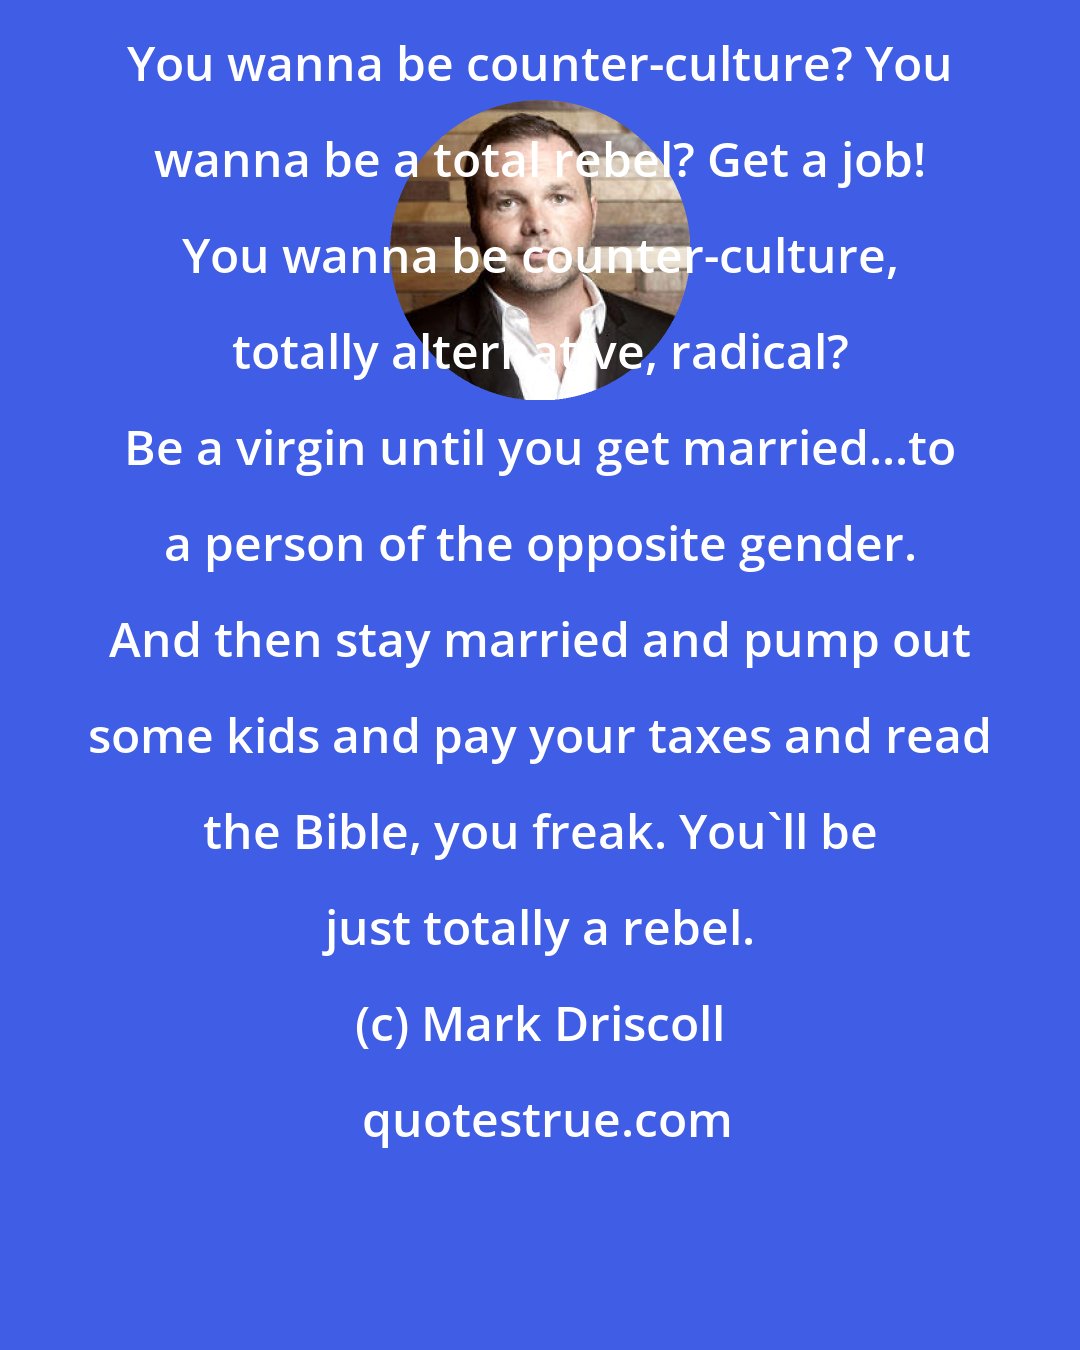 Mark Driscoll: You wanna be counter-culture? You wanna be a total rebel? Get a job! You wanna be counter-culture, totally alternative, radical? Be a virgin until you get married...to a person of the opposite gender. And then stay married and pump out some kids and pay your taxes and read the Bible, you freak. You'll be just totally a rebel.